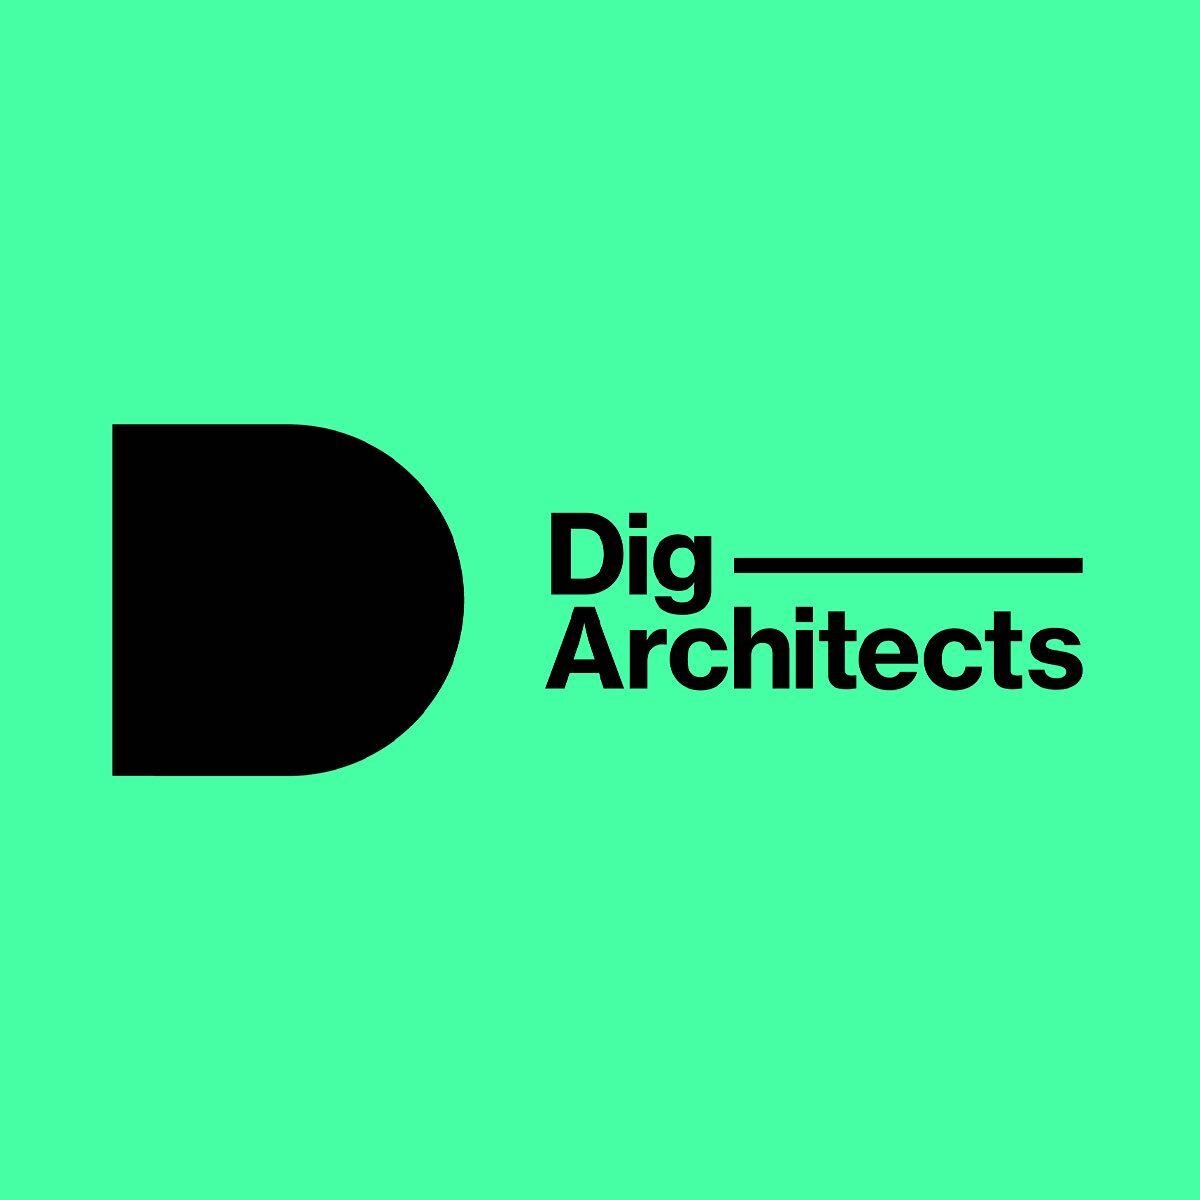 We know an architect,
And he&rsquo;s really big.
He designs real nice buildings,
And his nicknames Dig. 🙌🏻🌞🏠
.
.
Dig Architects &ndash; a leading architectural practice in the Southwest concentrating on bespoke, uplifting, net zero buildings. All